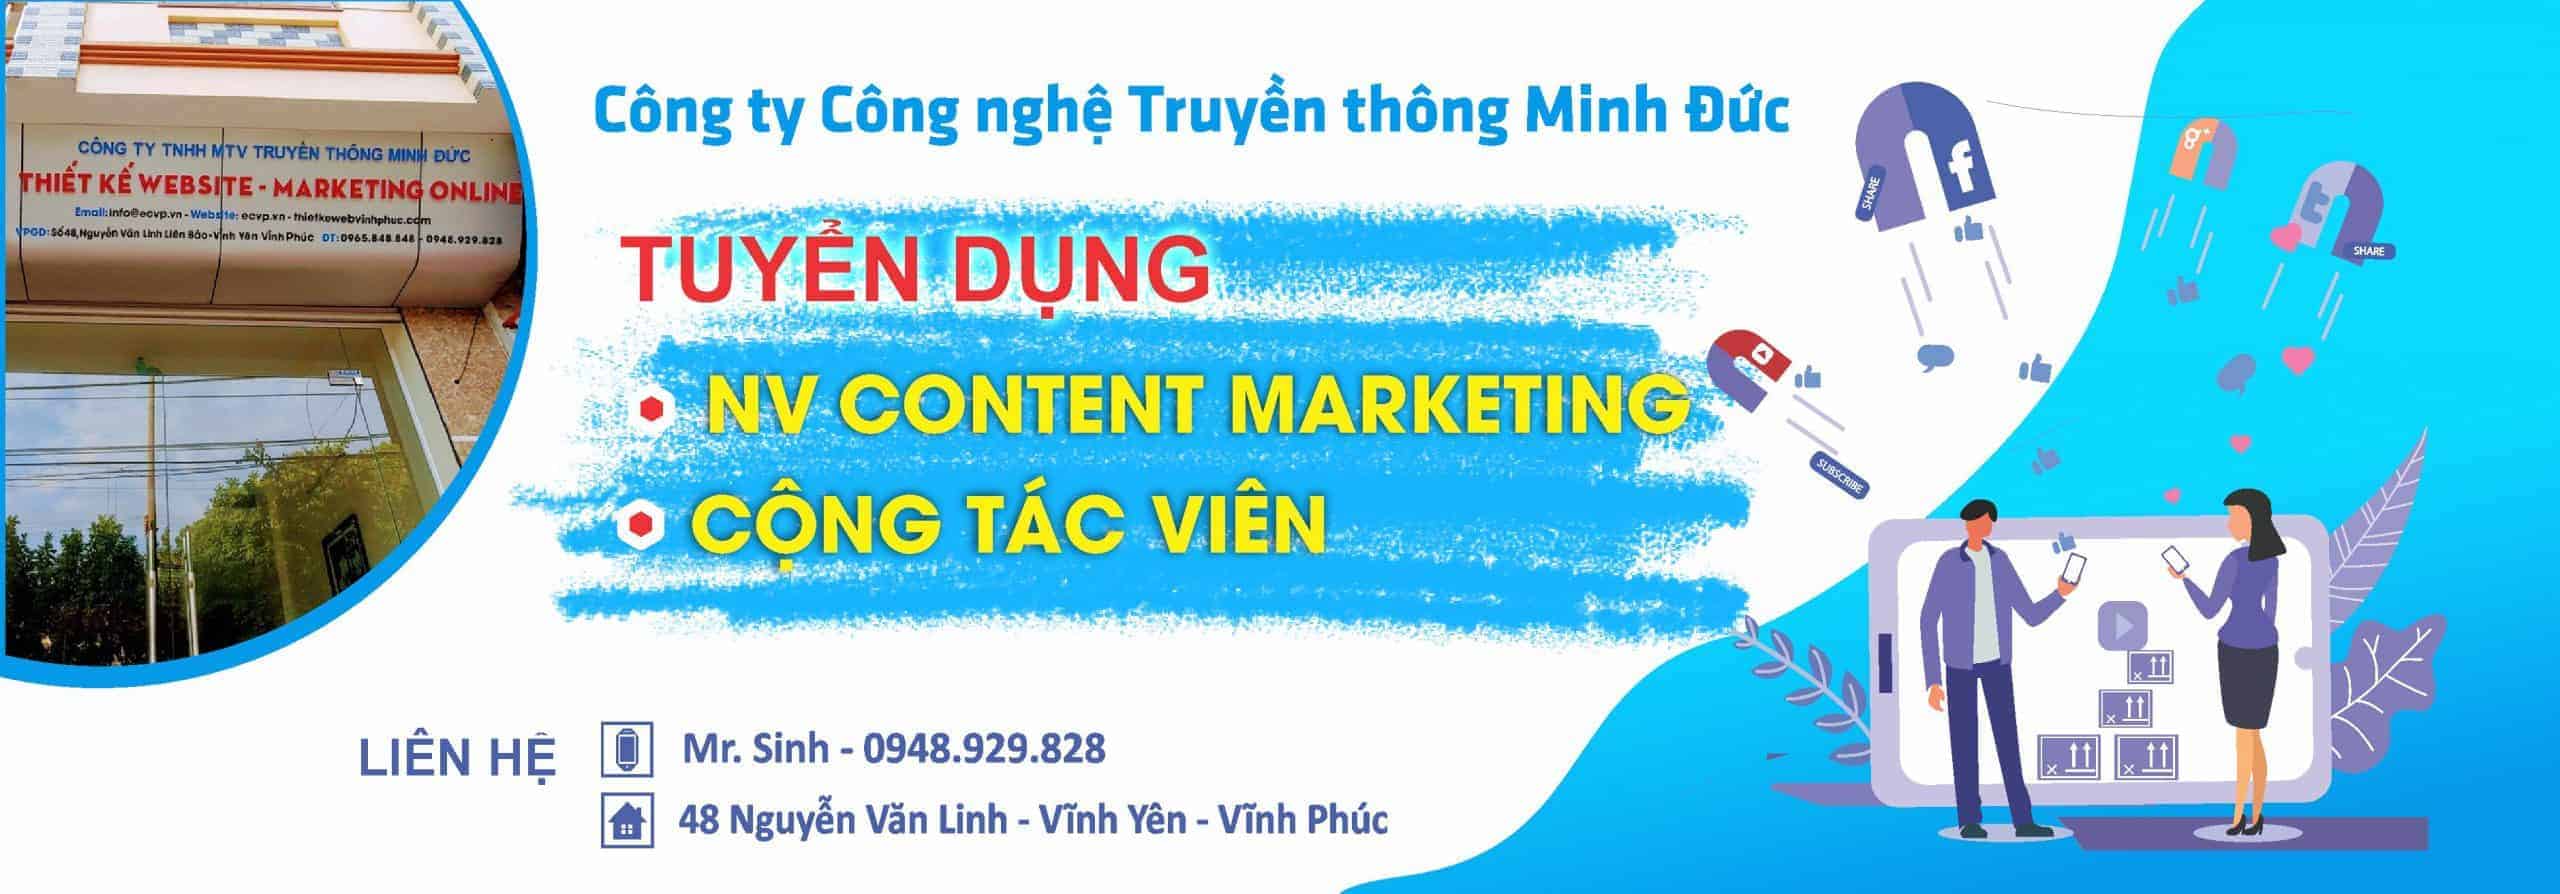 Image Banner Tuyen Dung Minh Duc 030522 083701 Scaled